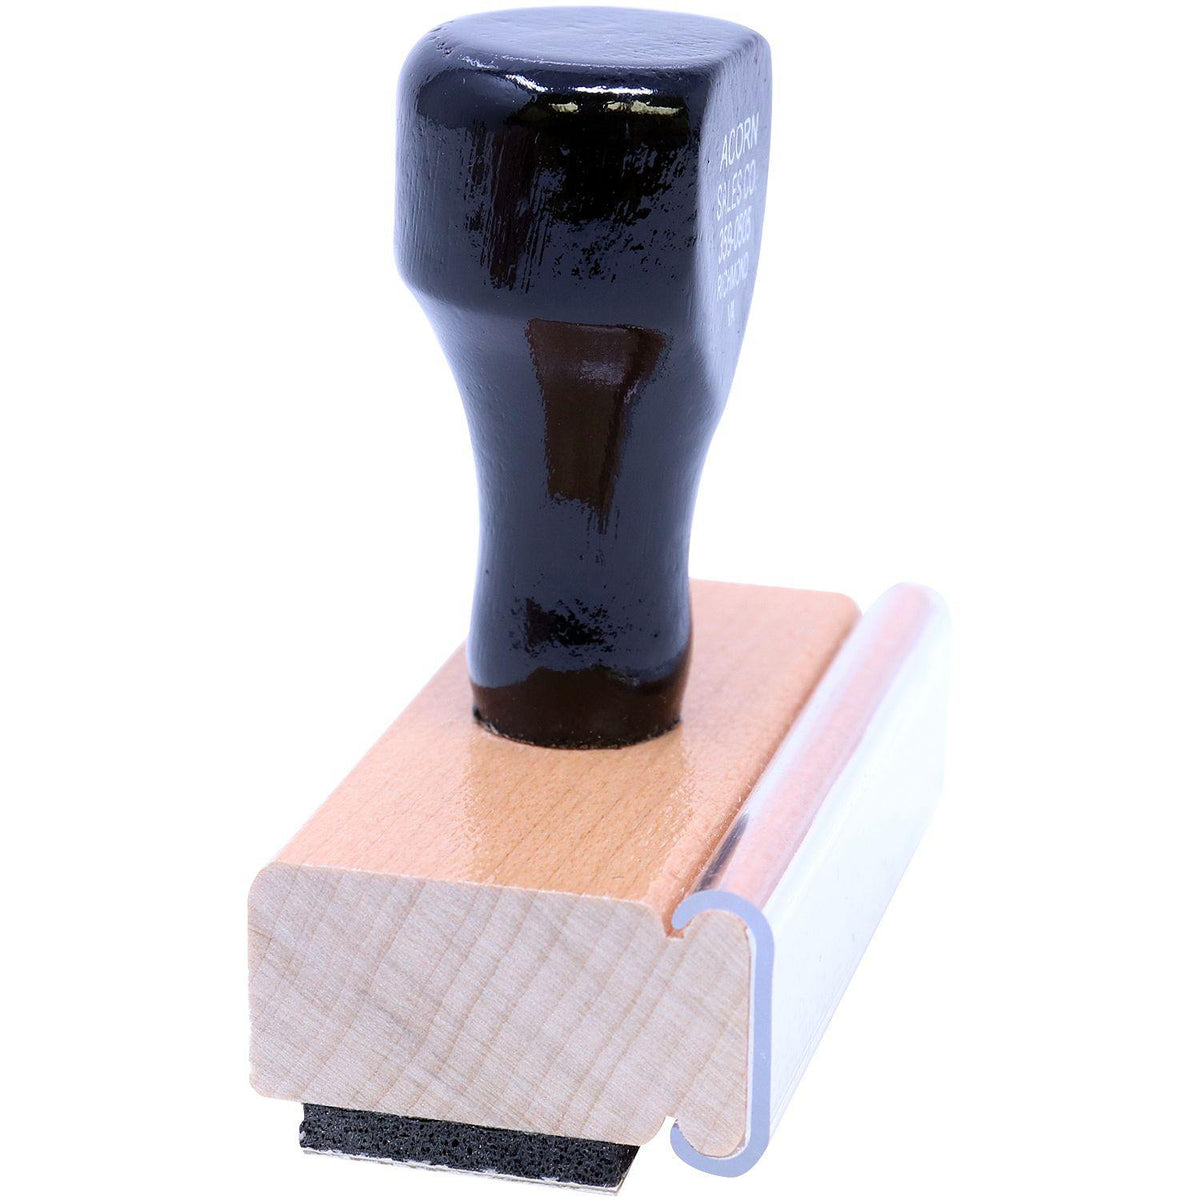 Side View of Large Blue Shield Rubber Stamp at an Angle